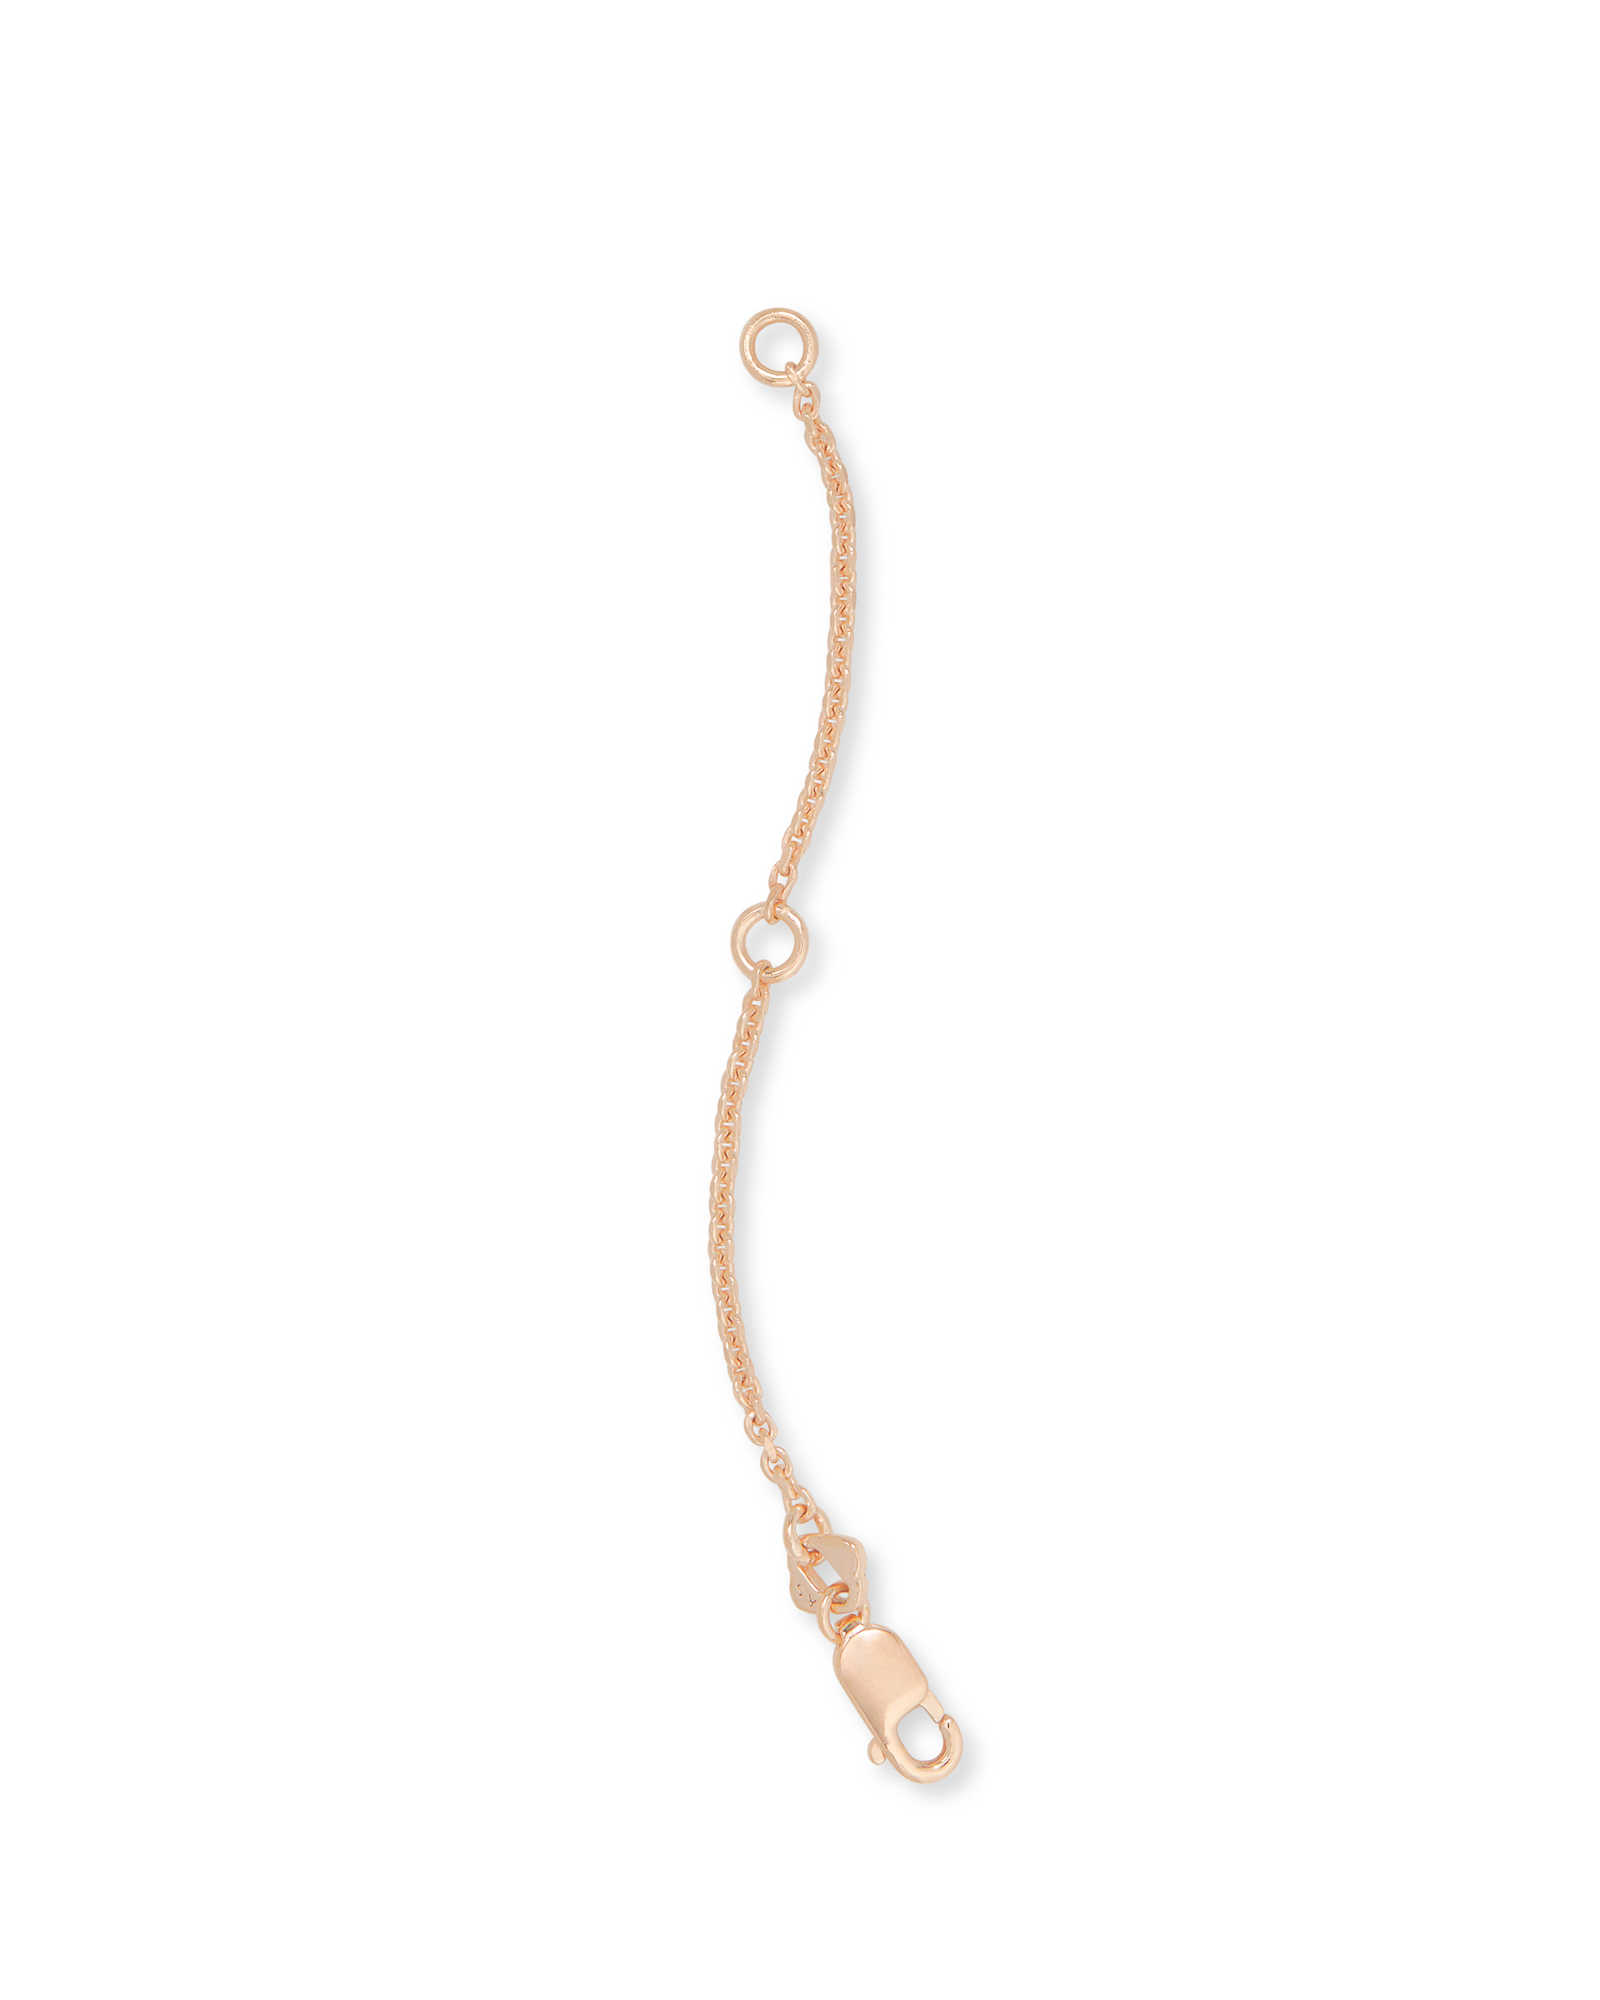 Necklace Extender Rose Gold Necklace Extenders 925 Sterling Silver